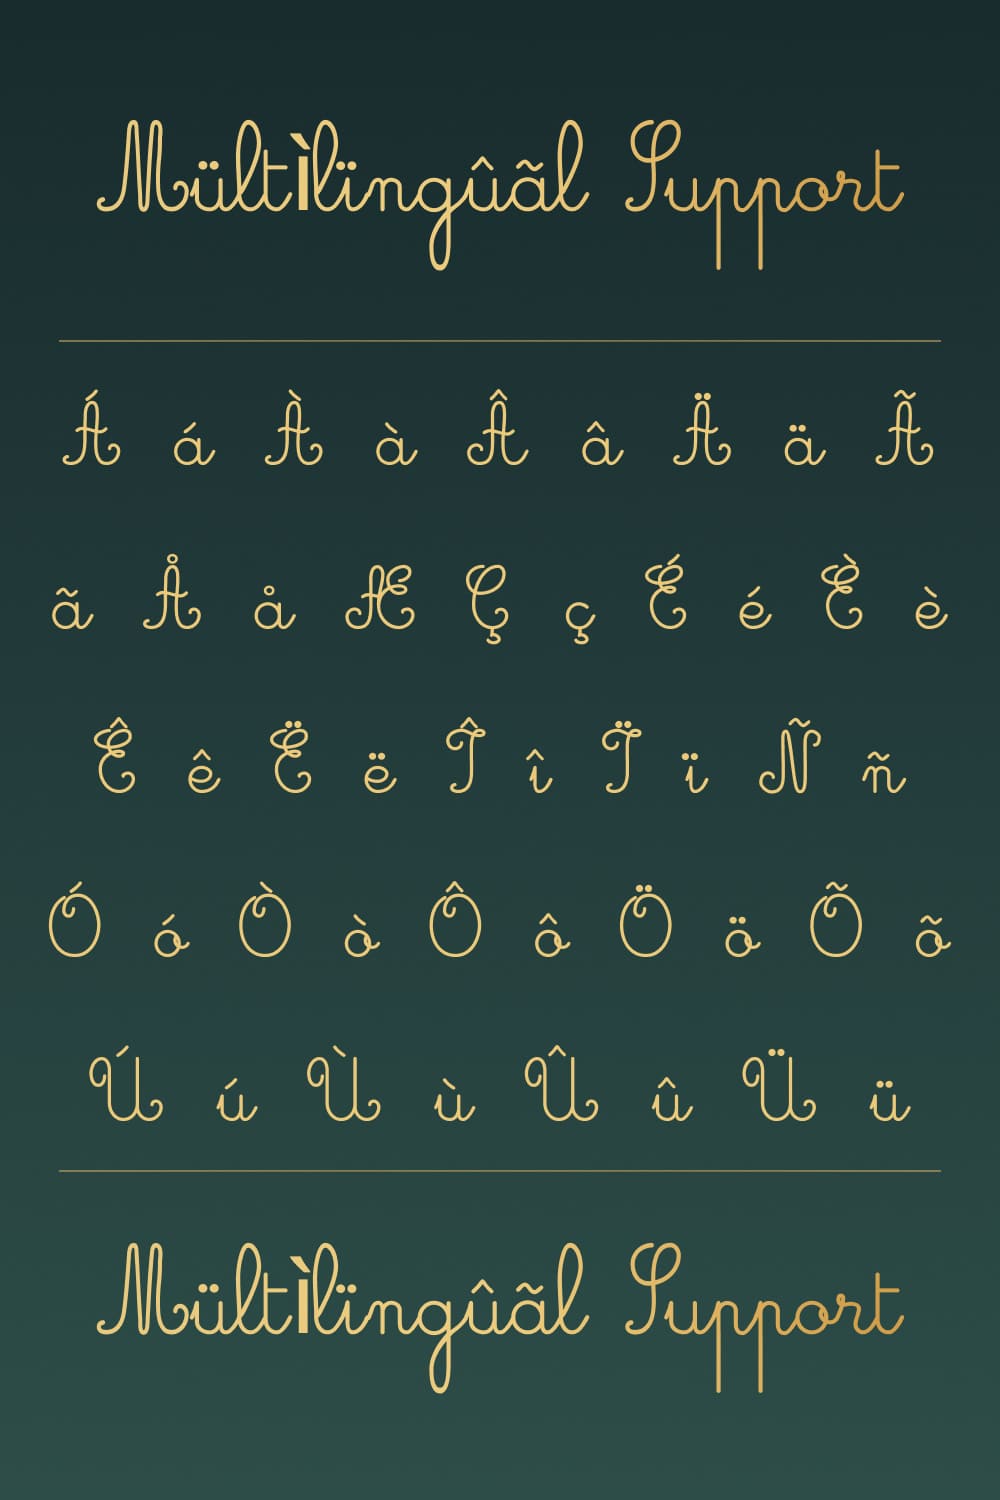 Multilingual support of the Free Cursive Font.